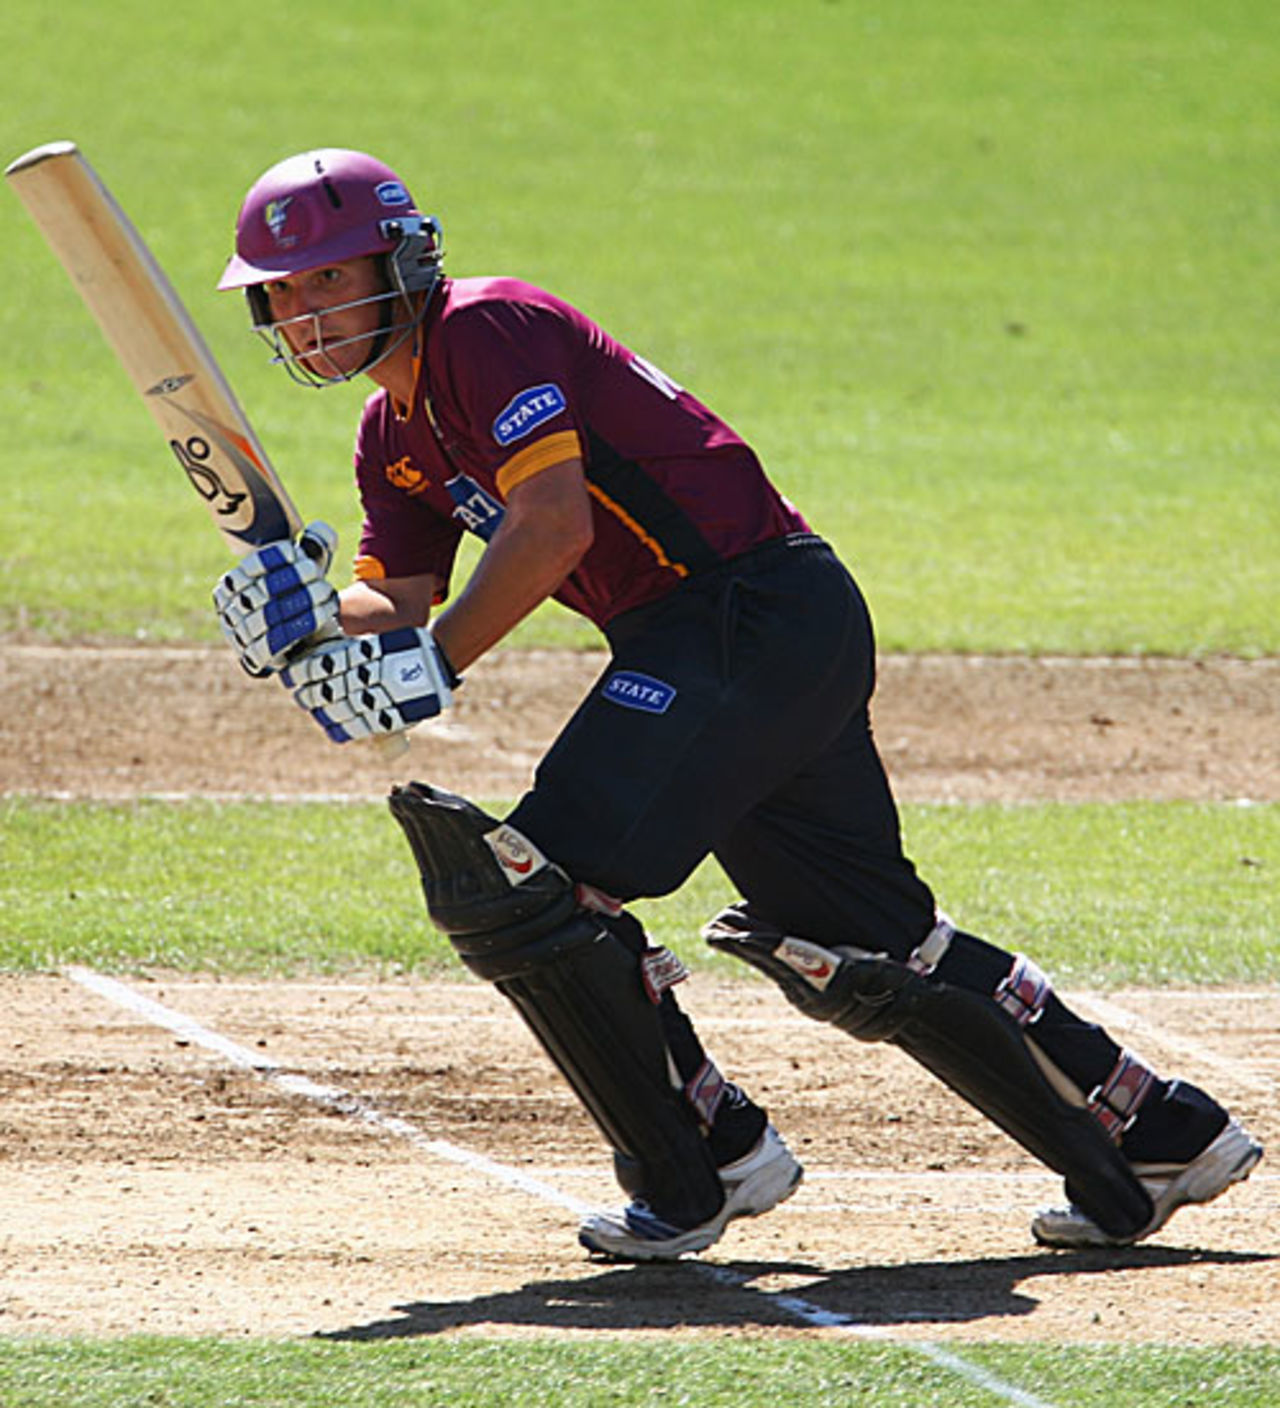 BJ Watling remained unbeaten on 113, Auckland v Northern Districts, State Shield, Eden Park Outer Oval, January 21, 2009